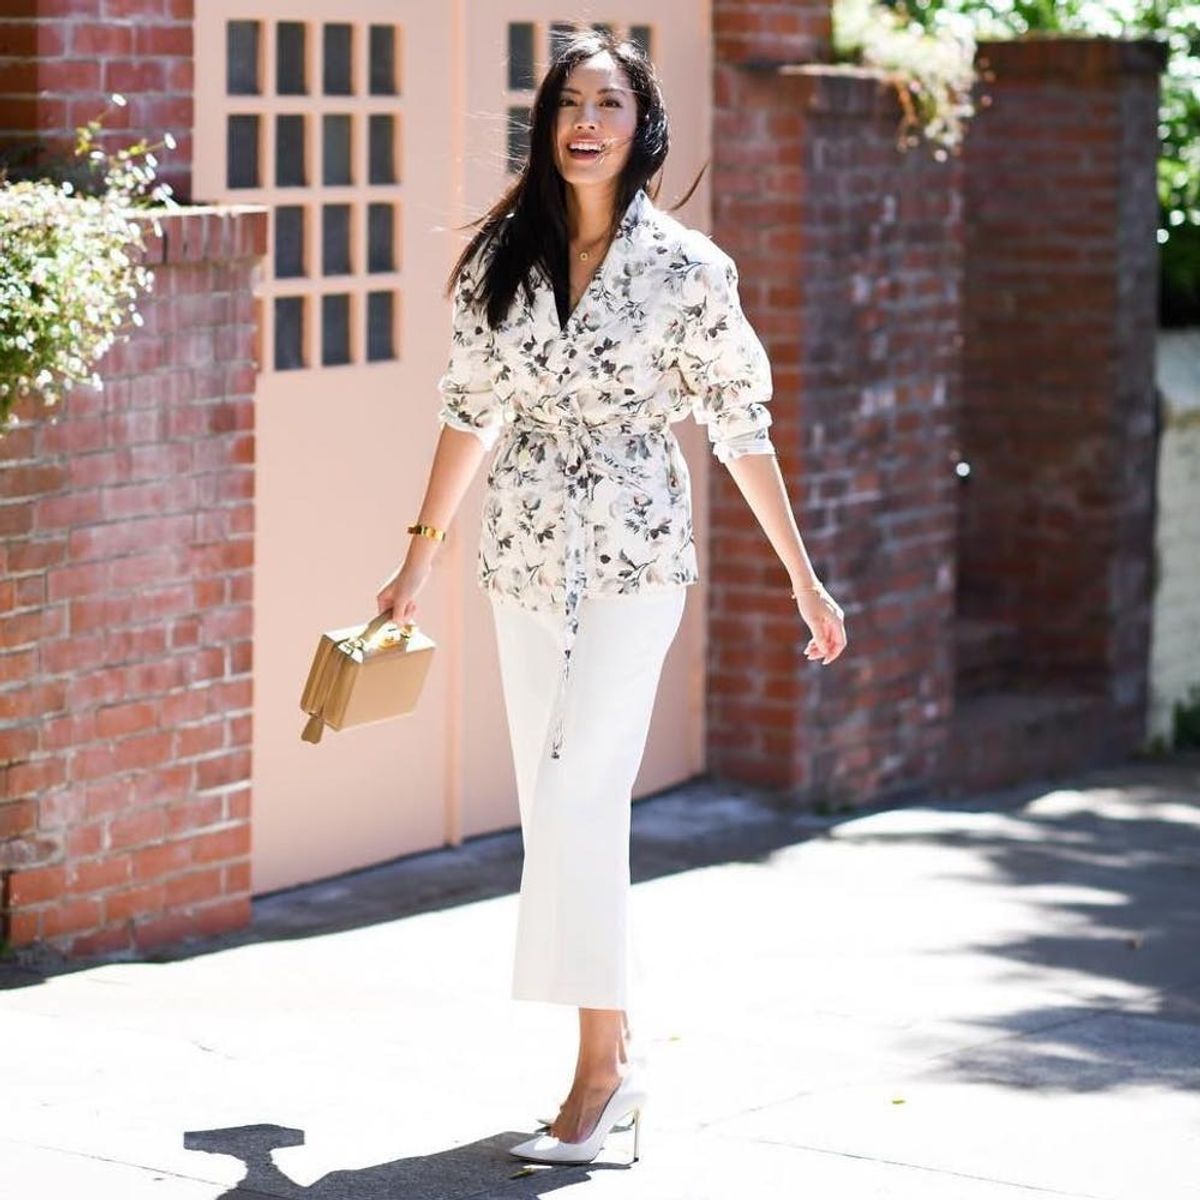 10 Street Style-Approved Ways to Wear Head-to-Toe White This Summer